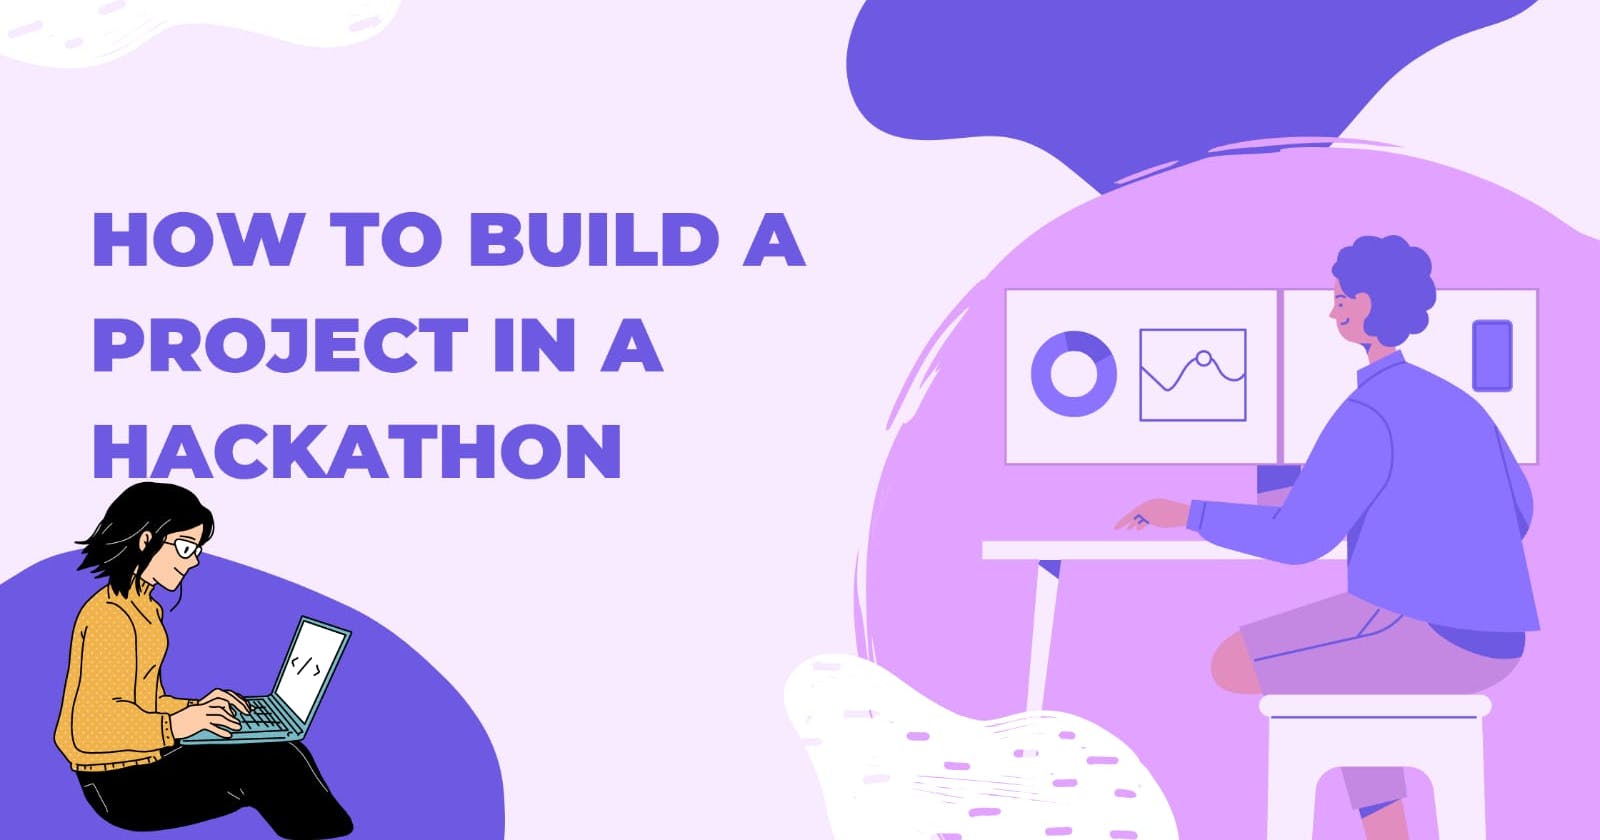 Tips to Build a Project in a Hackathon